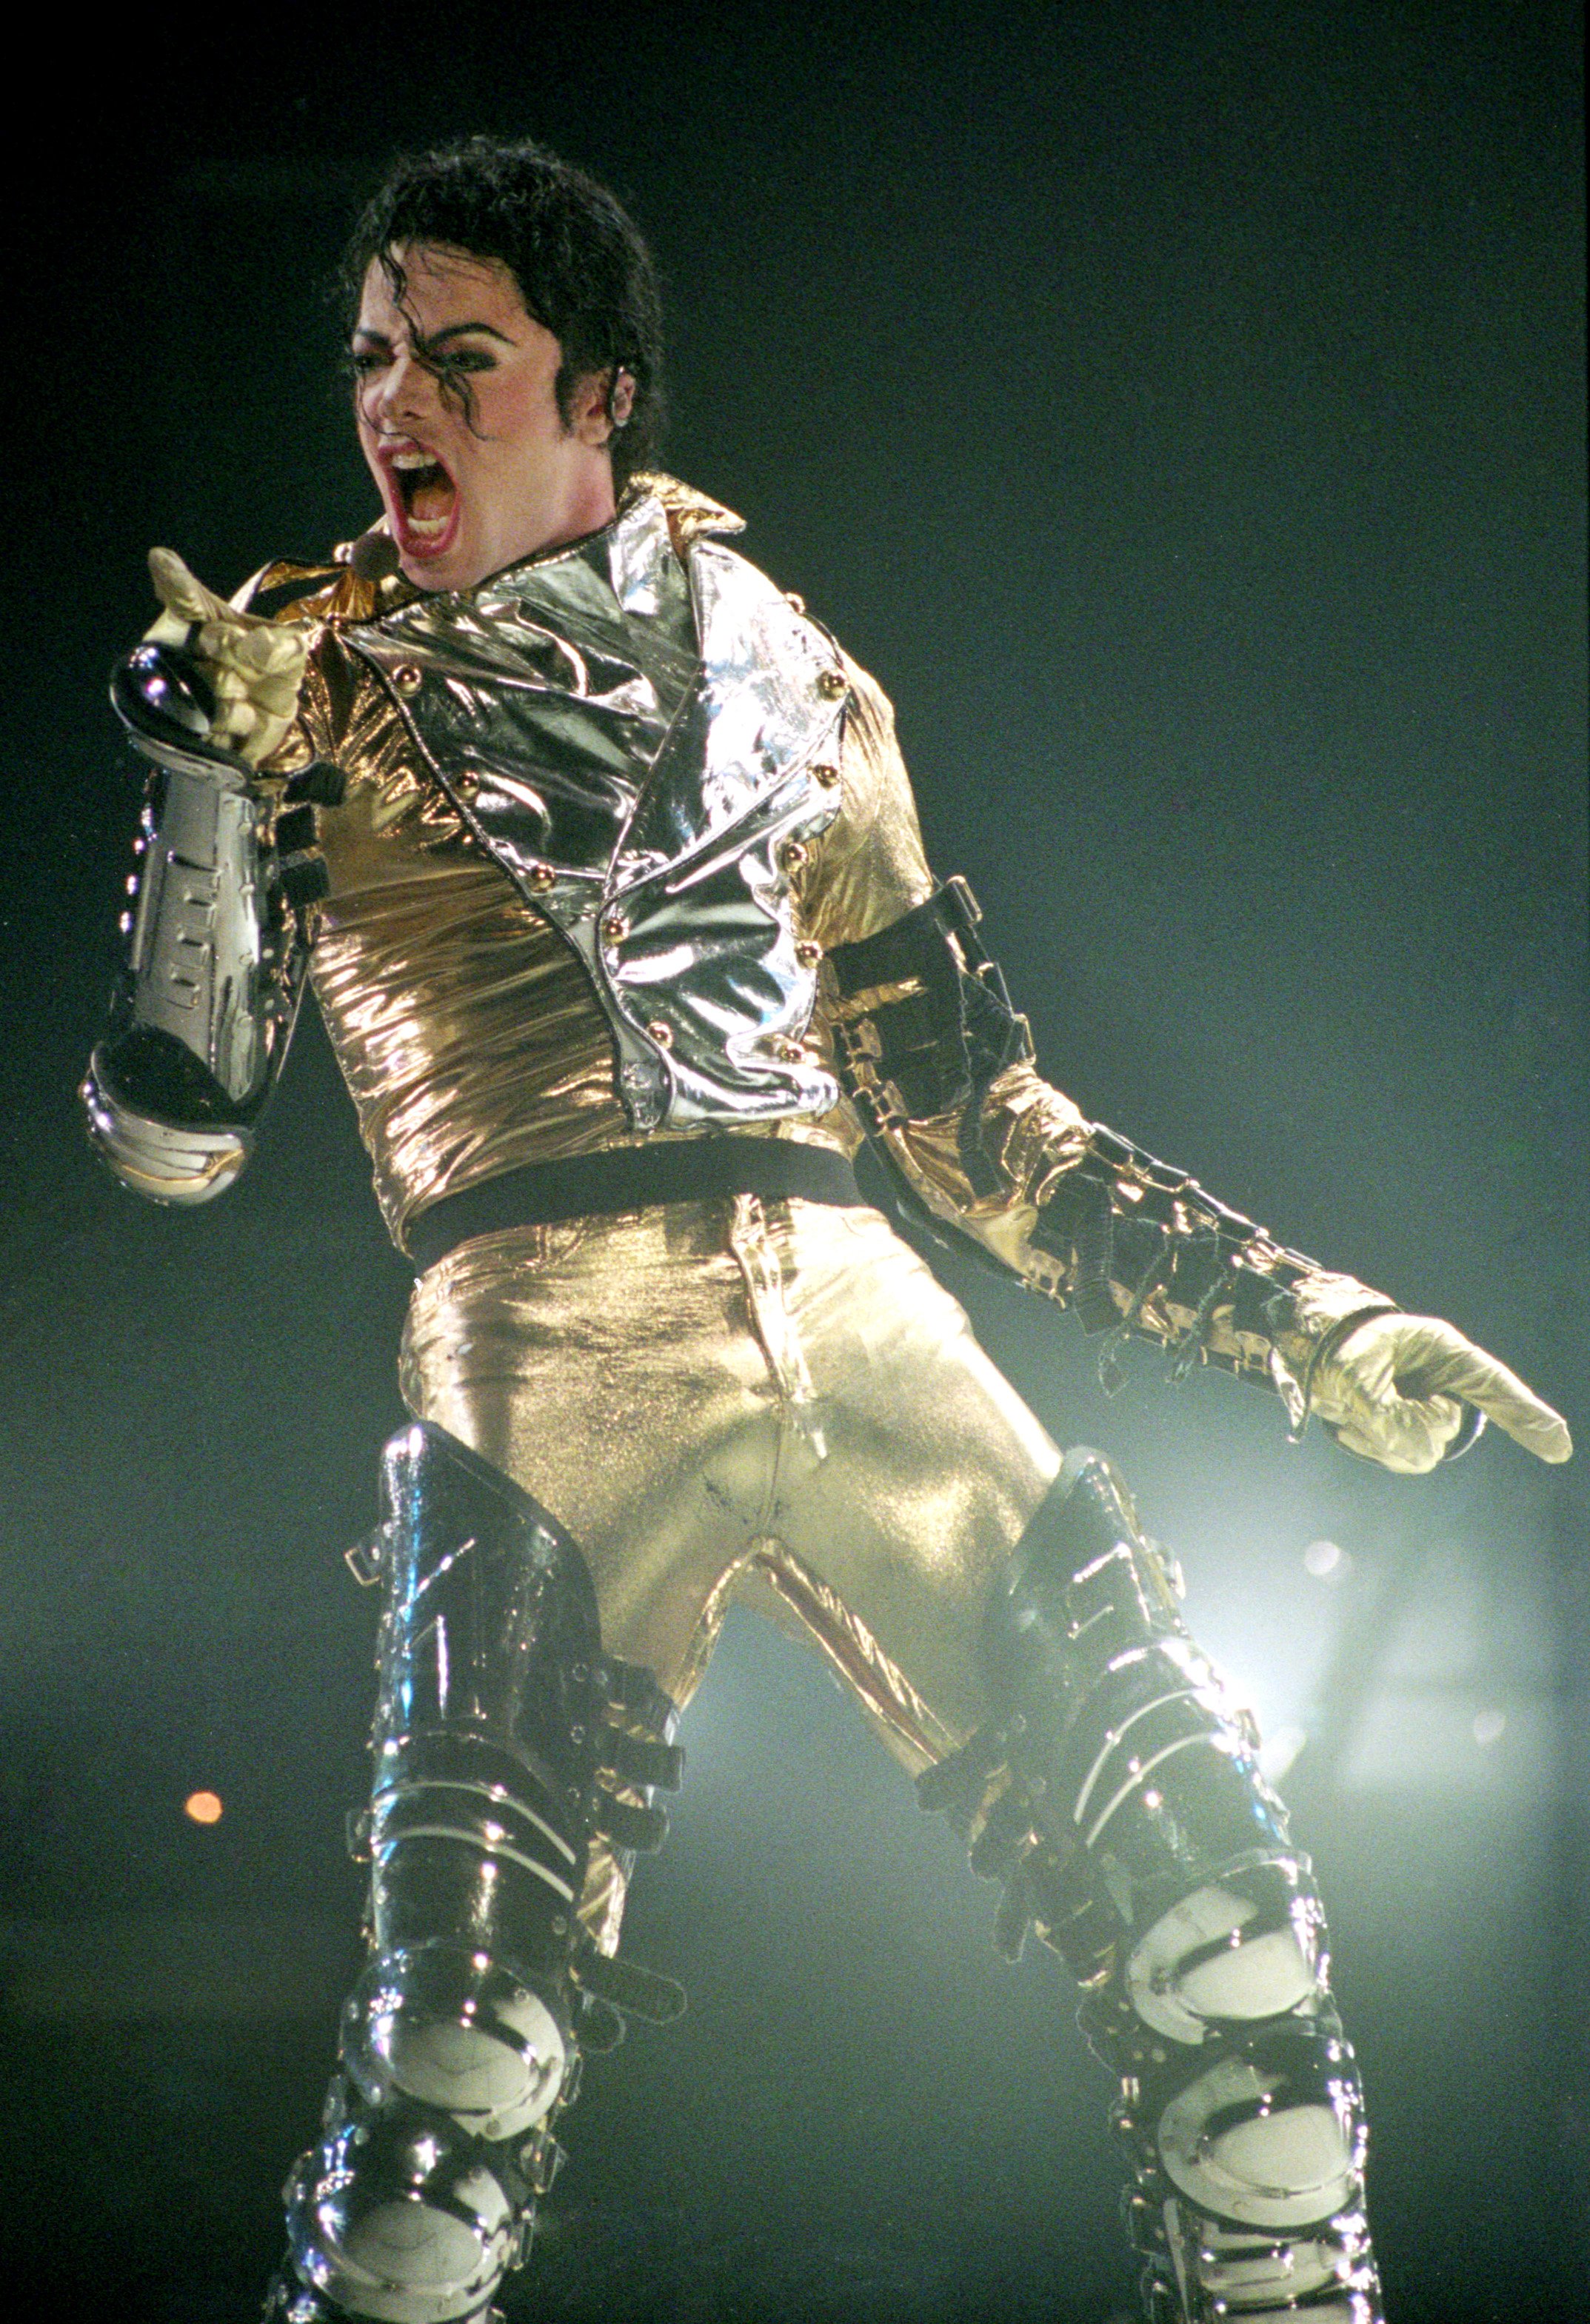 Michael Jackson performs on stage during "HIStory" world tour concert , in Auckland on November 10, 1996. | Photo: Getty Images